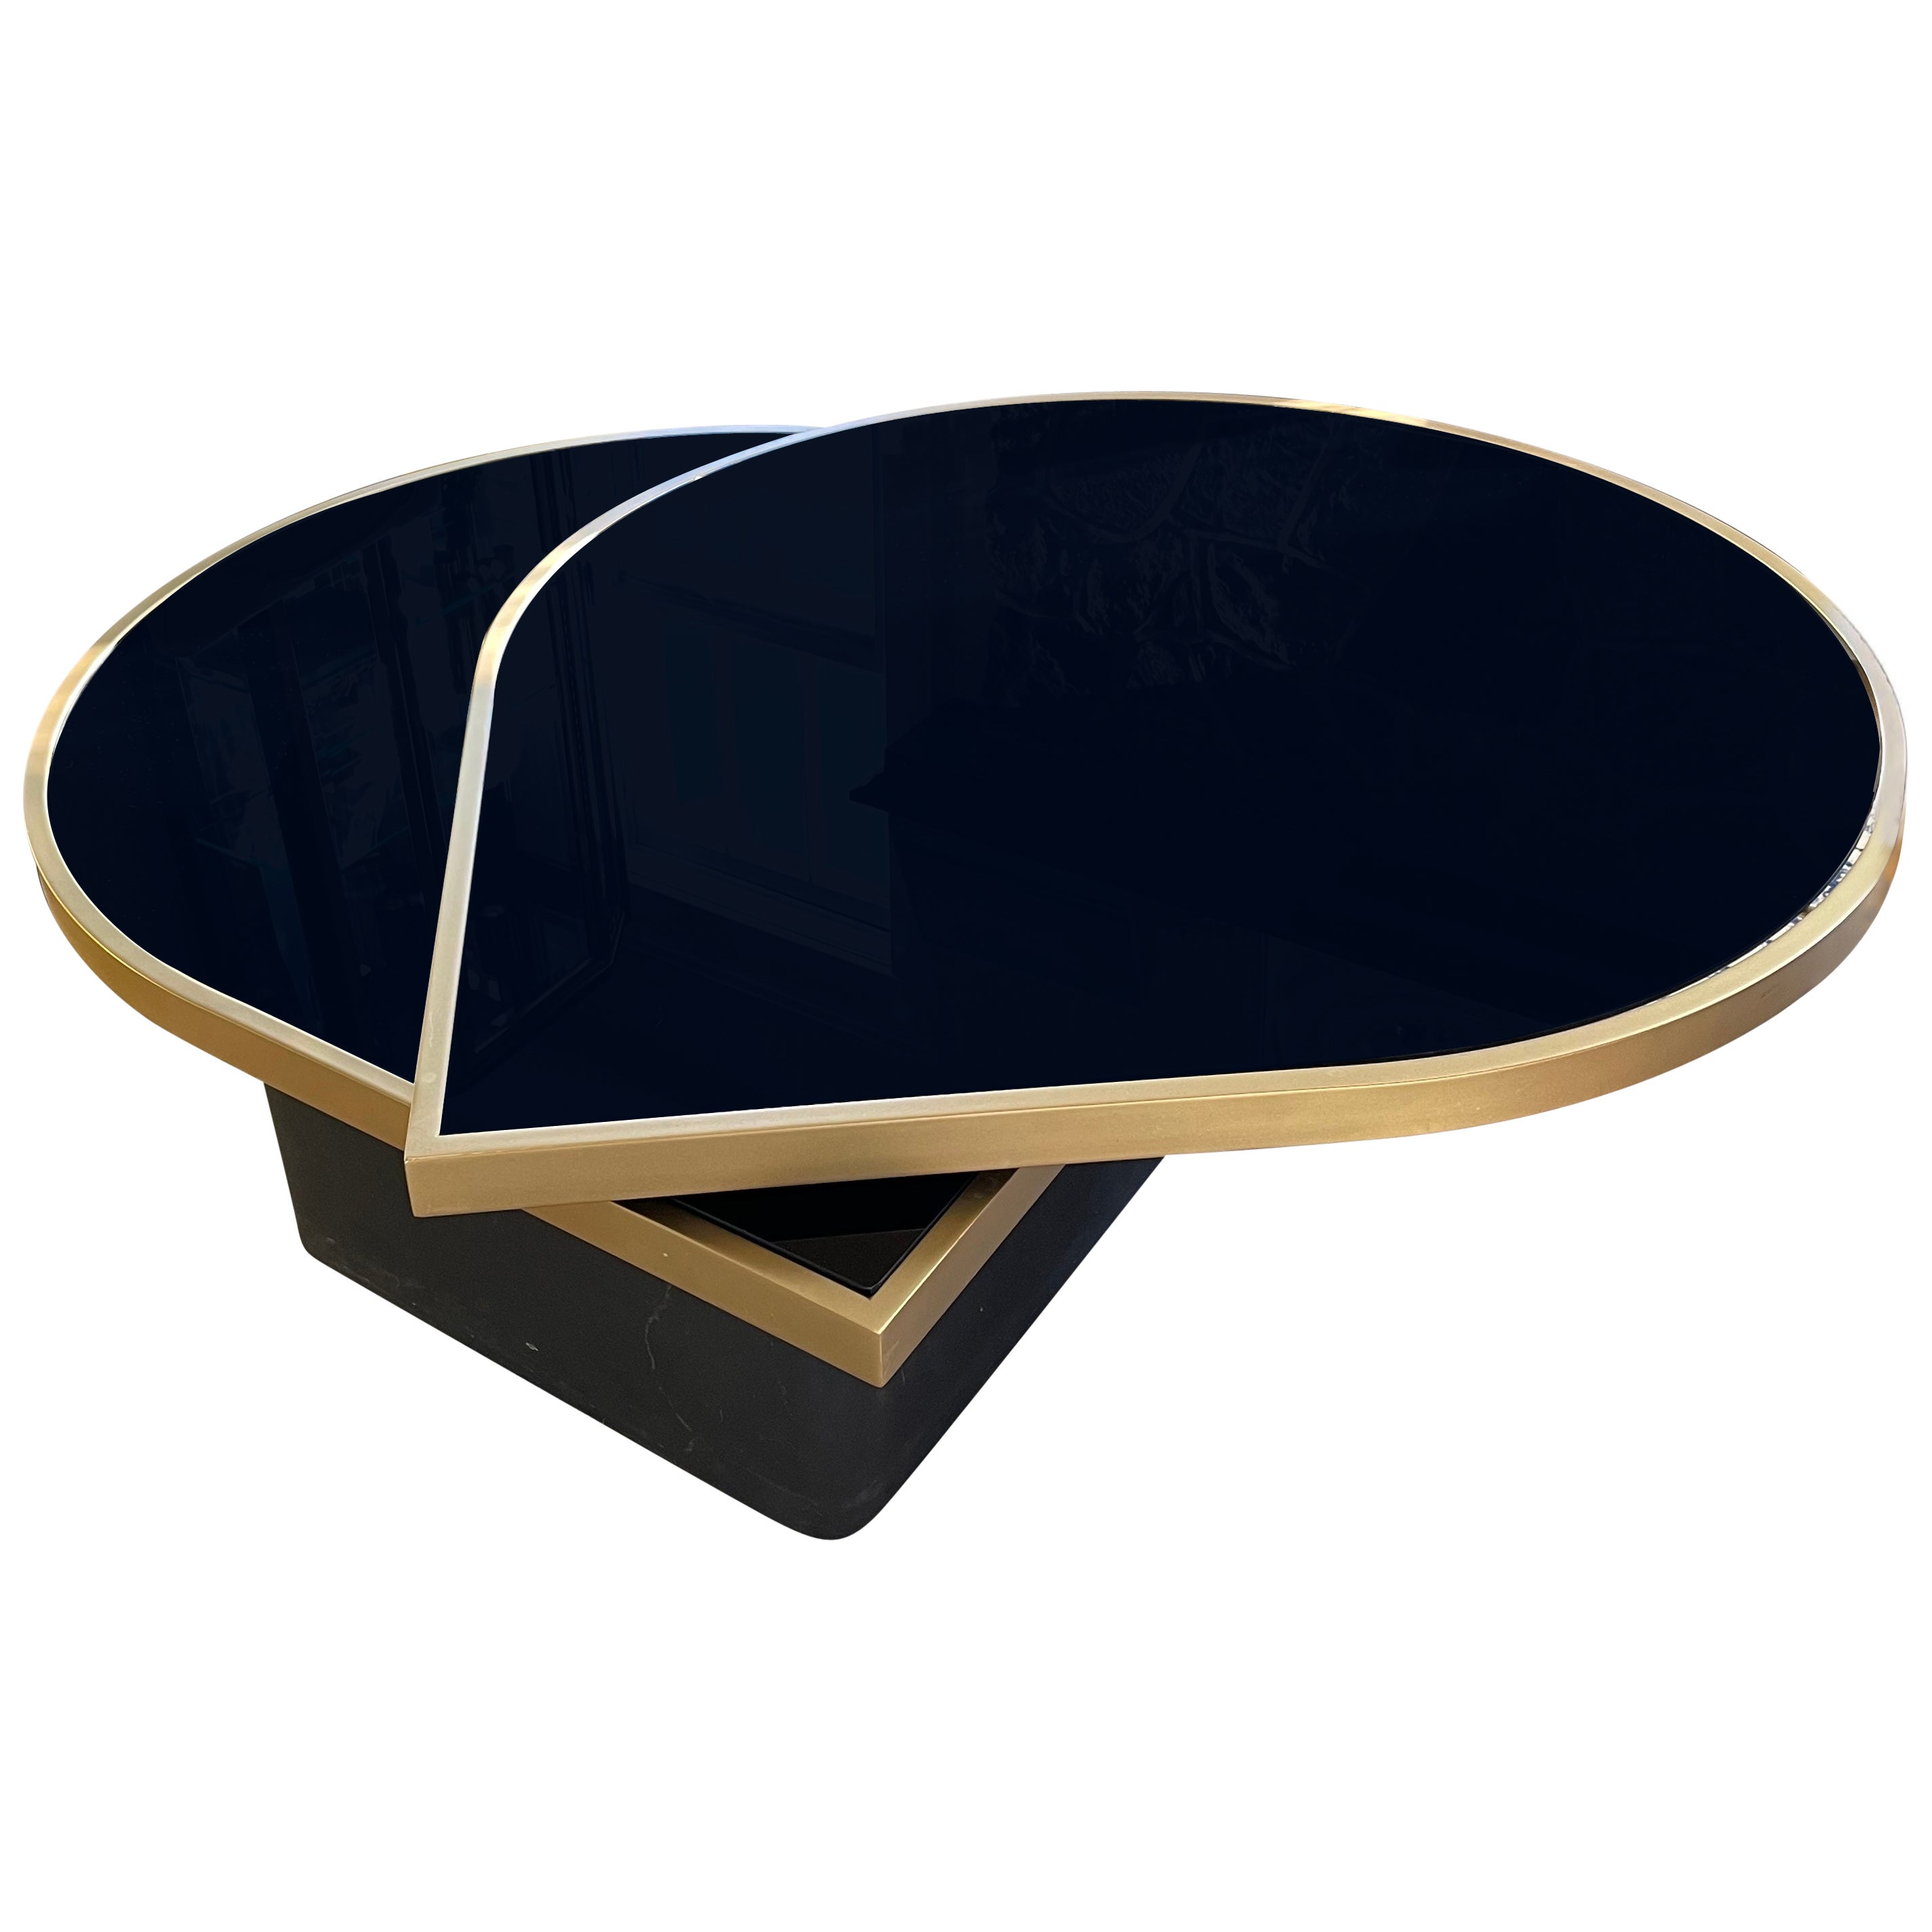 Milo Baughman for  DIA Black Glass and Brass Teardrop Swivel Cocktail Table For Sale